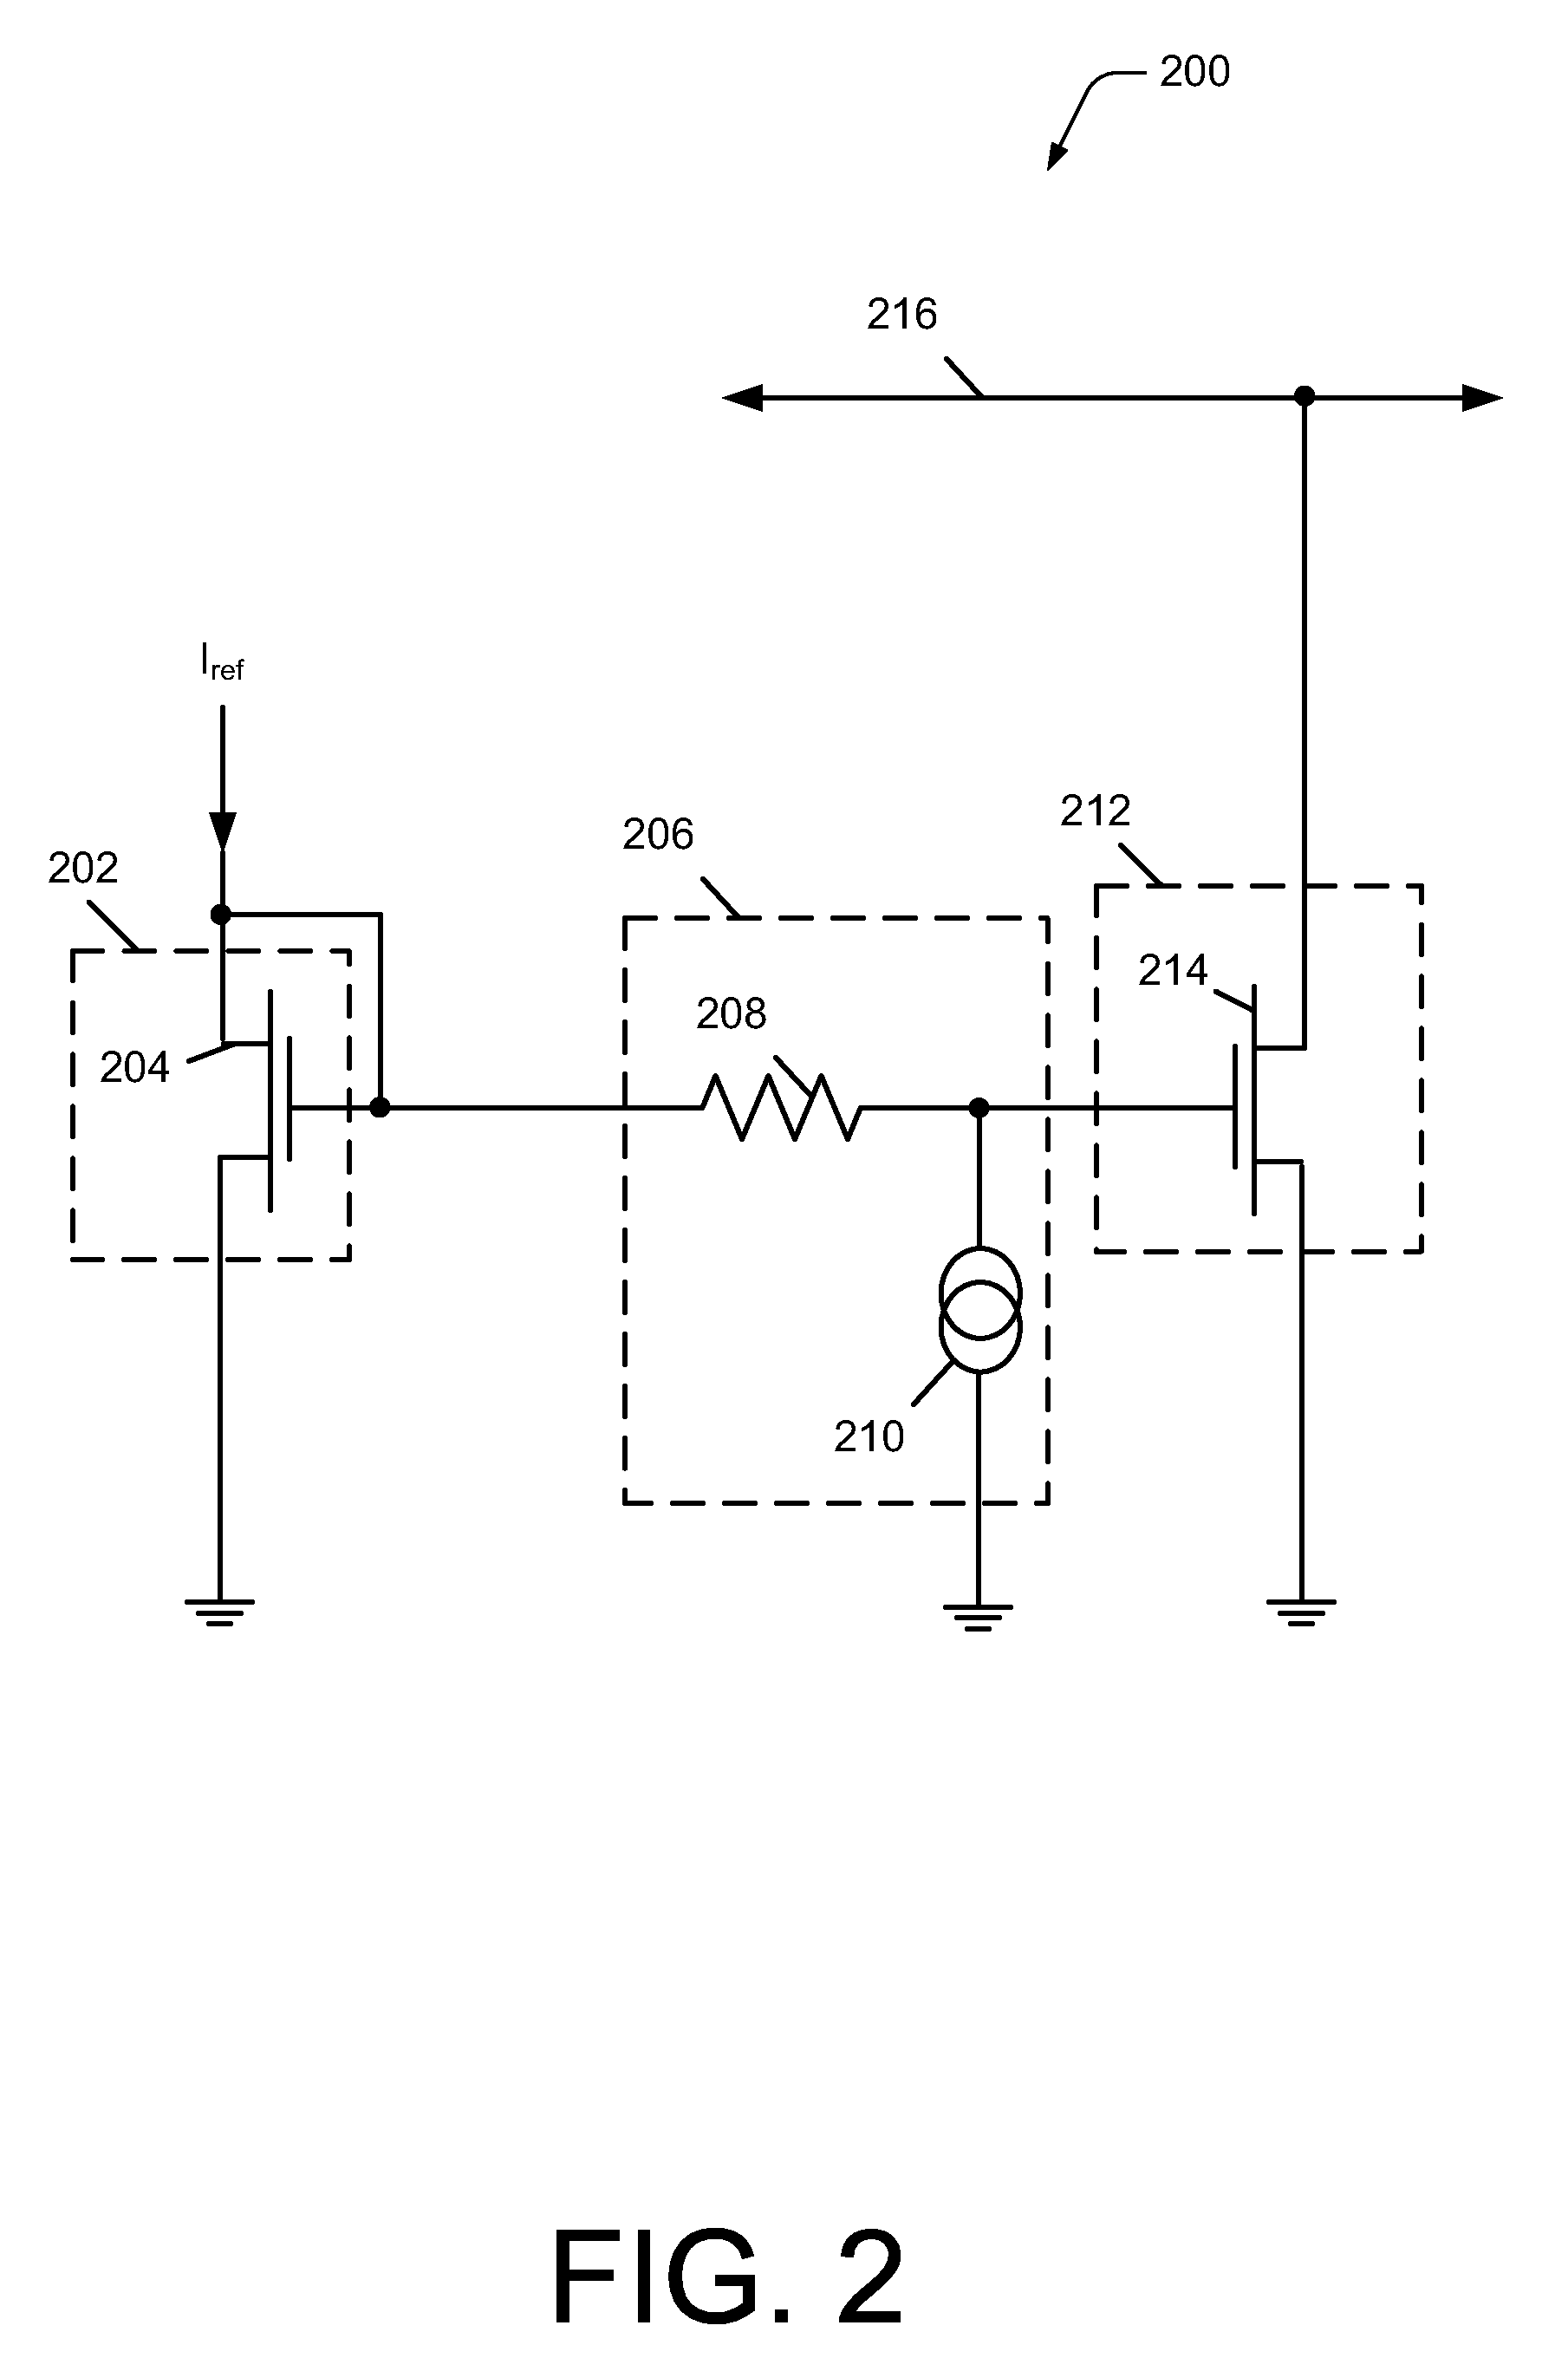 Impedance transformation with transistor circuits